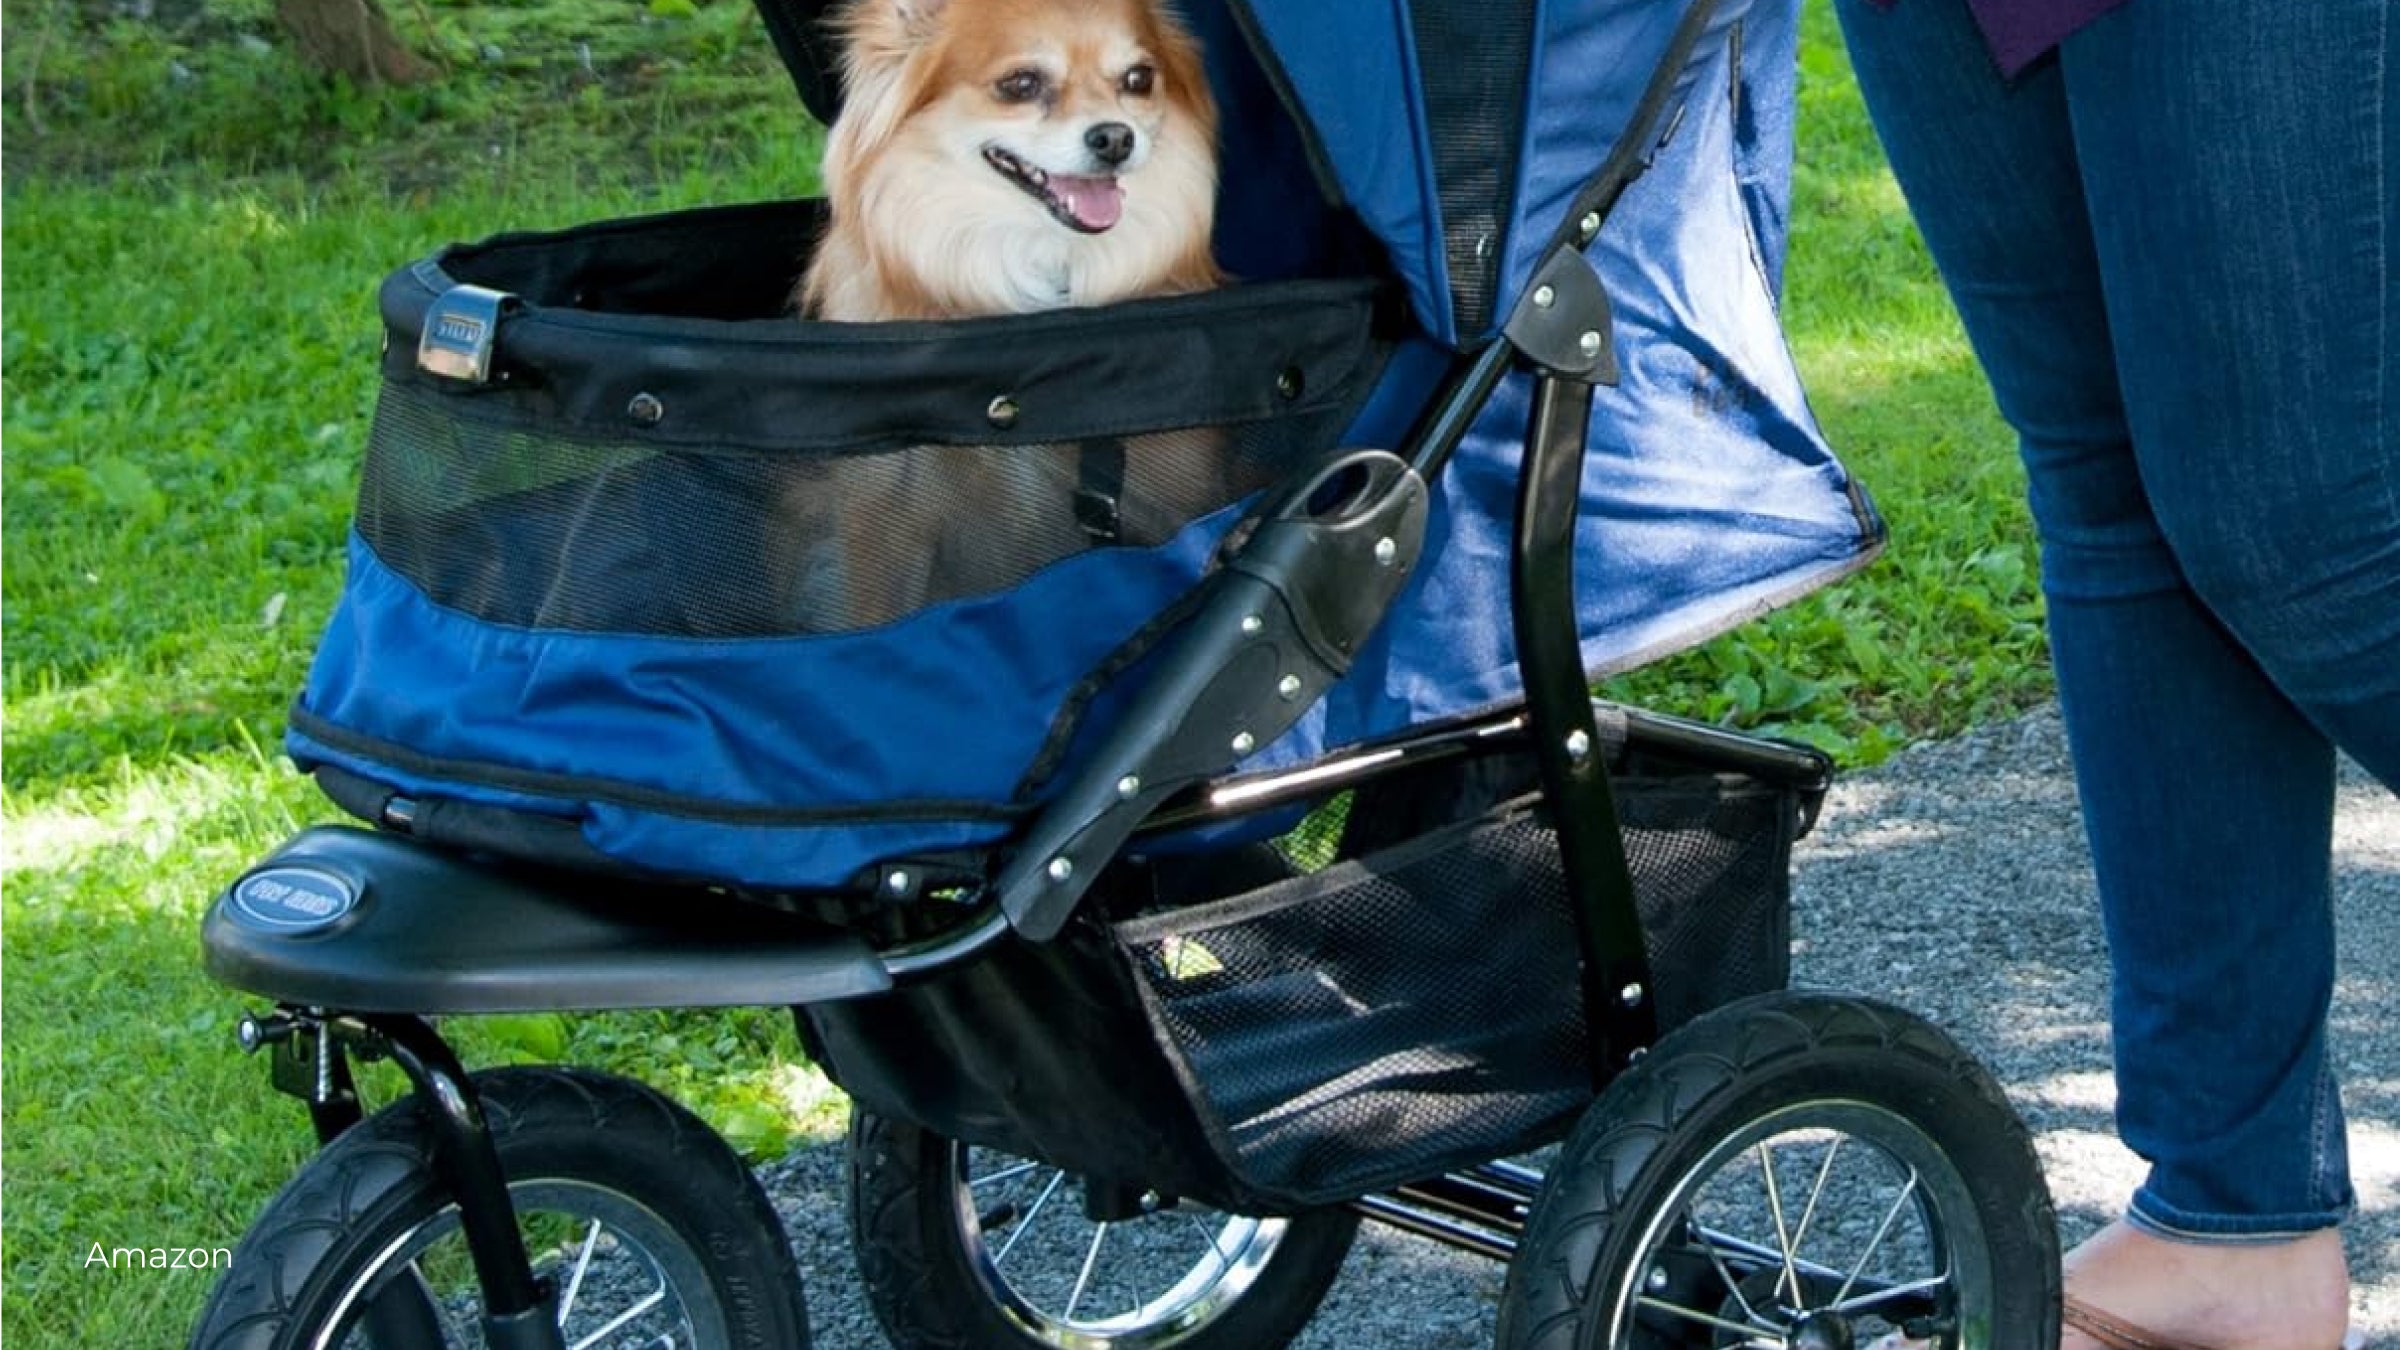 A tan and white dog rides in a blue jogger pet carrier on wheels